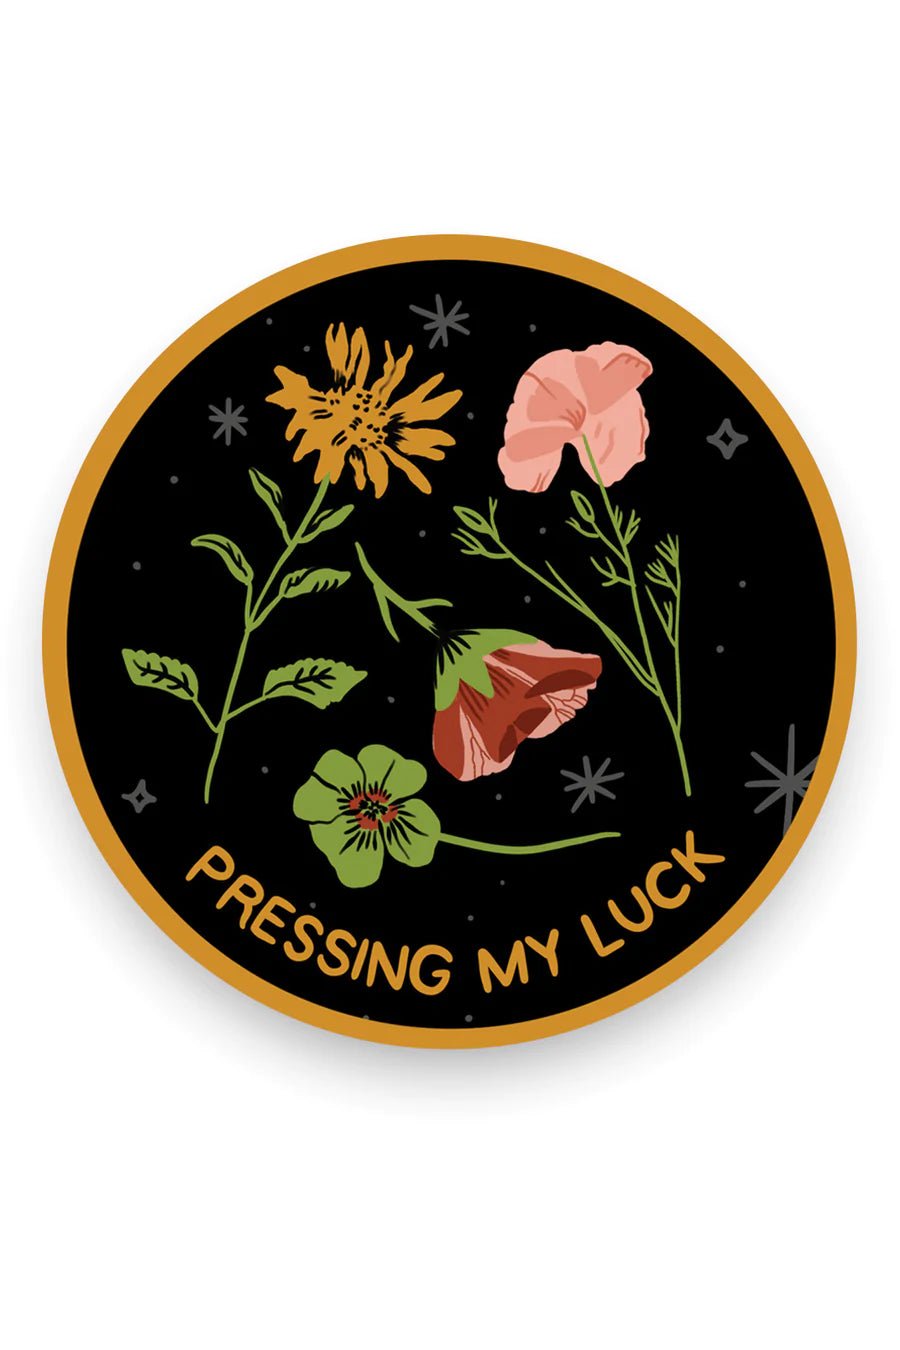 Pressing My Luck Sticker | Stay Home Club - Pretty by Her- handmade locally in Cambridge, Ontario